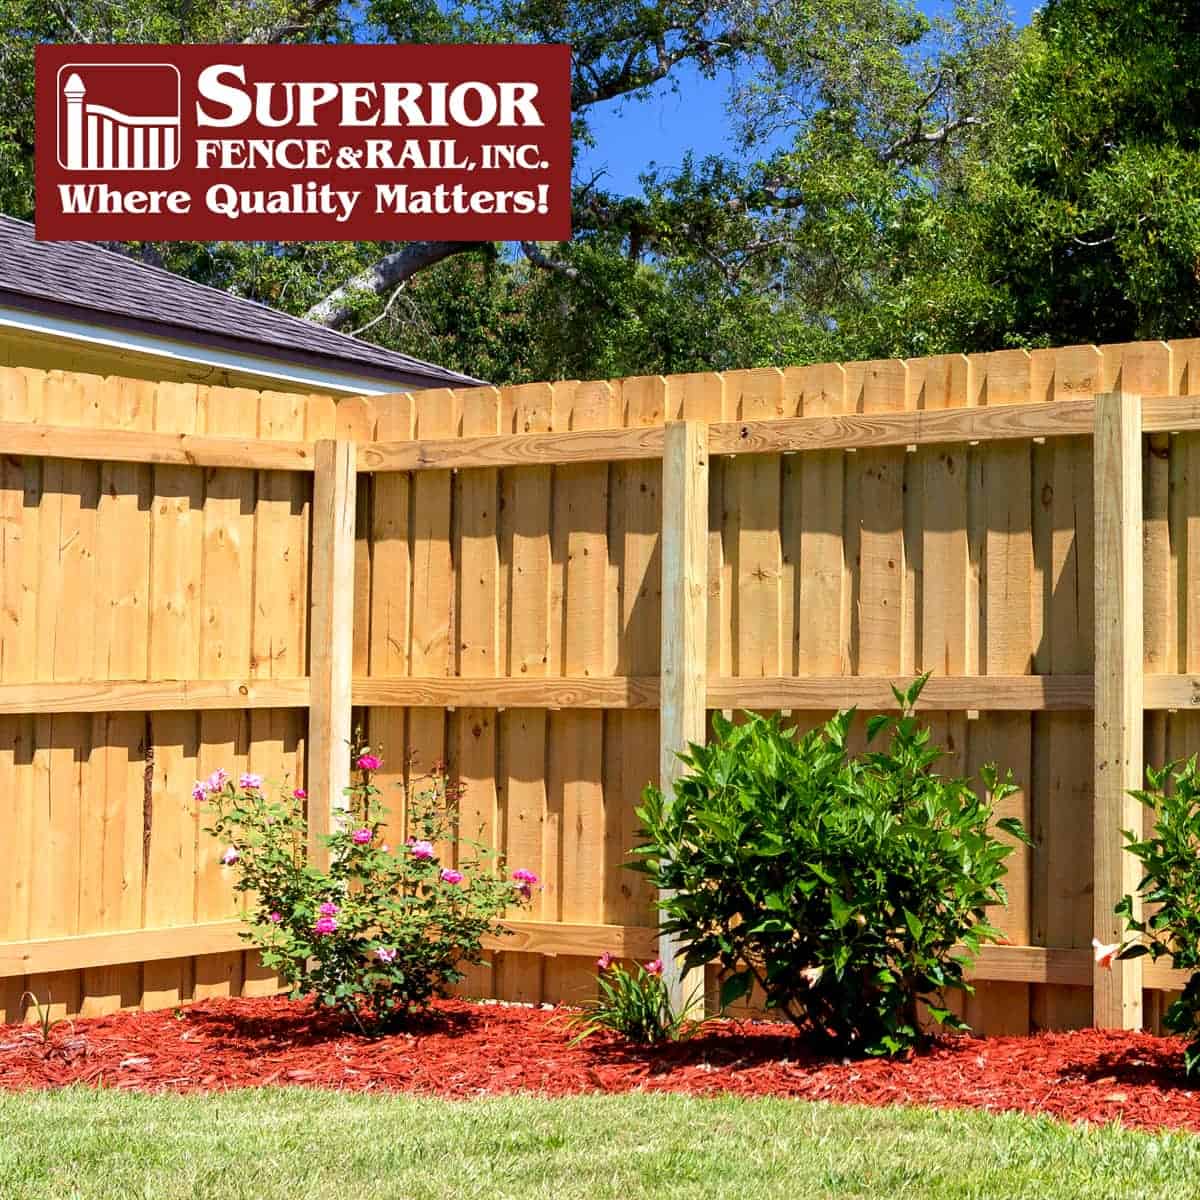 North Highlands fence company contractor